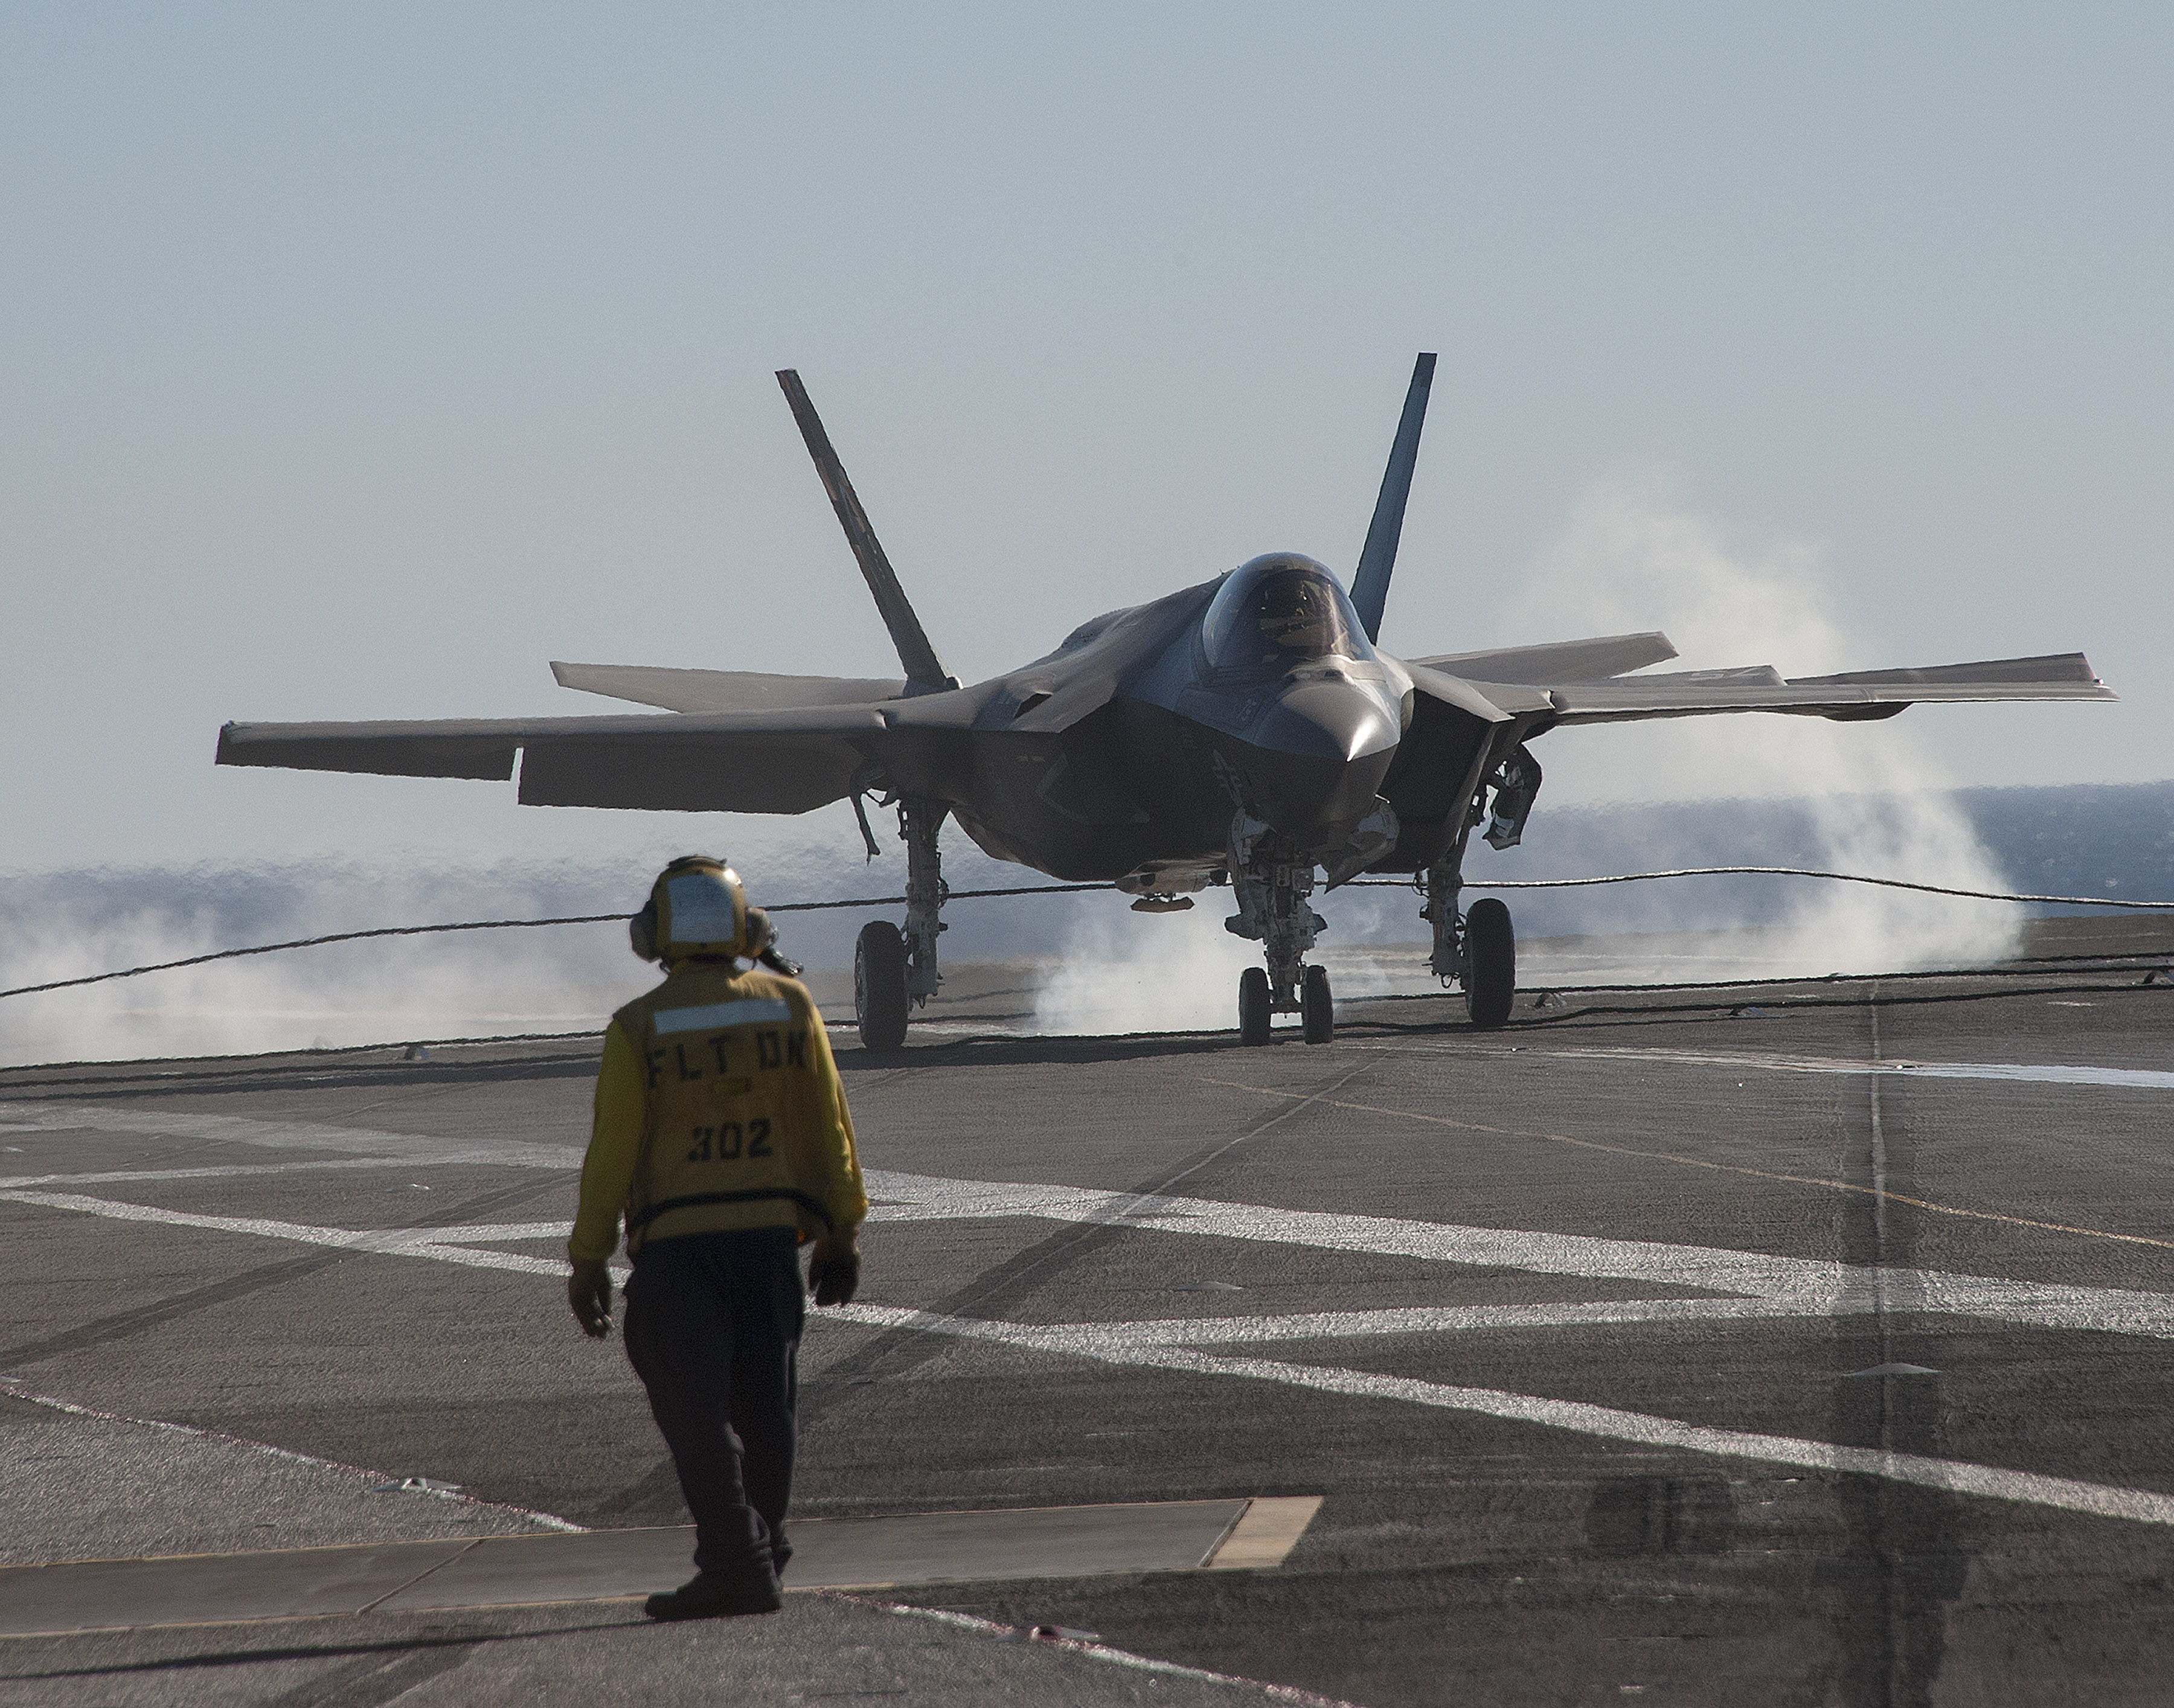 PACIFIC OCEAN (Nov. 6, 2014) An F-35C Lightning II carrier variant joint strike fighter makes an arrested landing aboard the aircraft carrier USS Nimitz (CVN 68). The F-35 Lightning II Pax River Integrated Test Force from Air Test and Evaluation Squadron (VX) 23 is currently conducting initial at-sea trials aboard Nimitz. U.S. Navy photo courtesy of Lockheed Martin by Alexander H Groves.